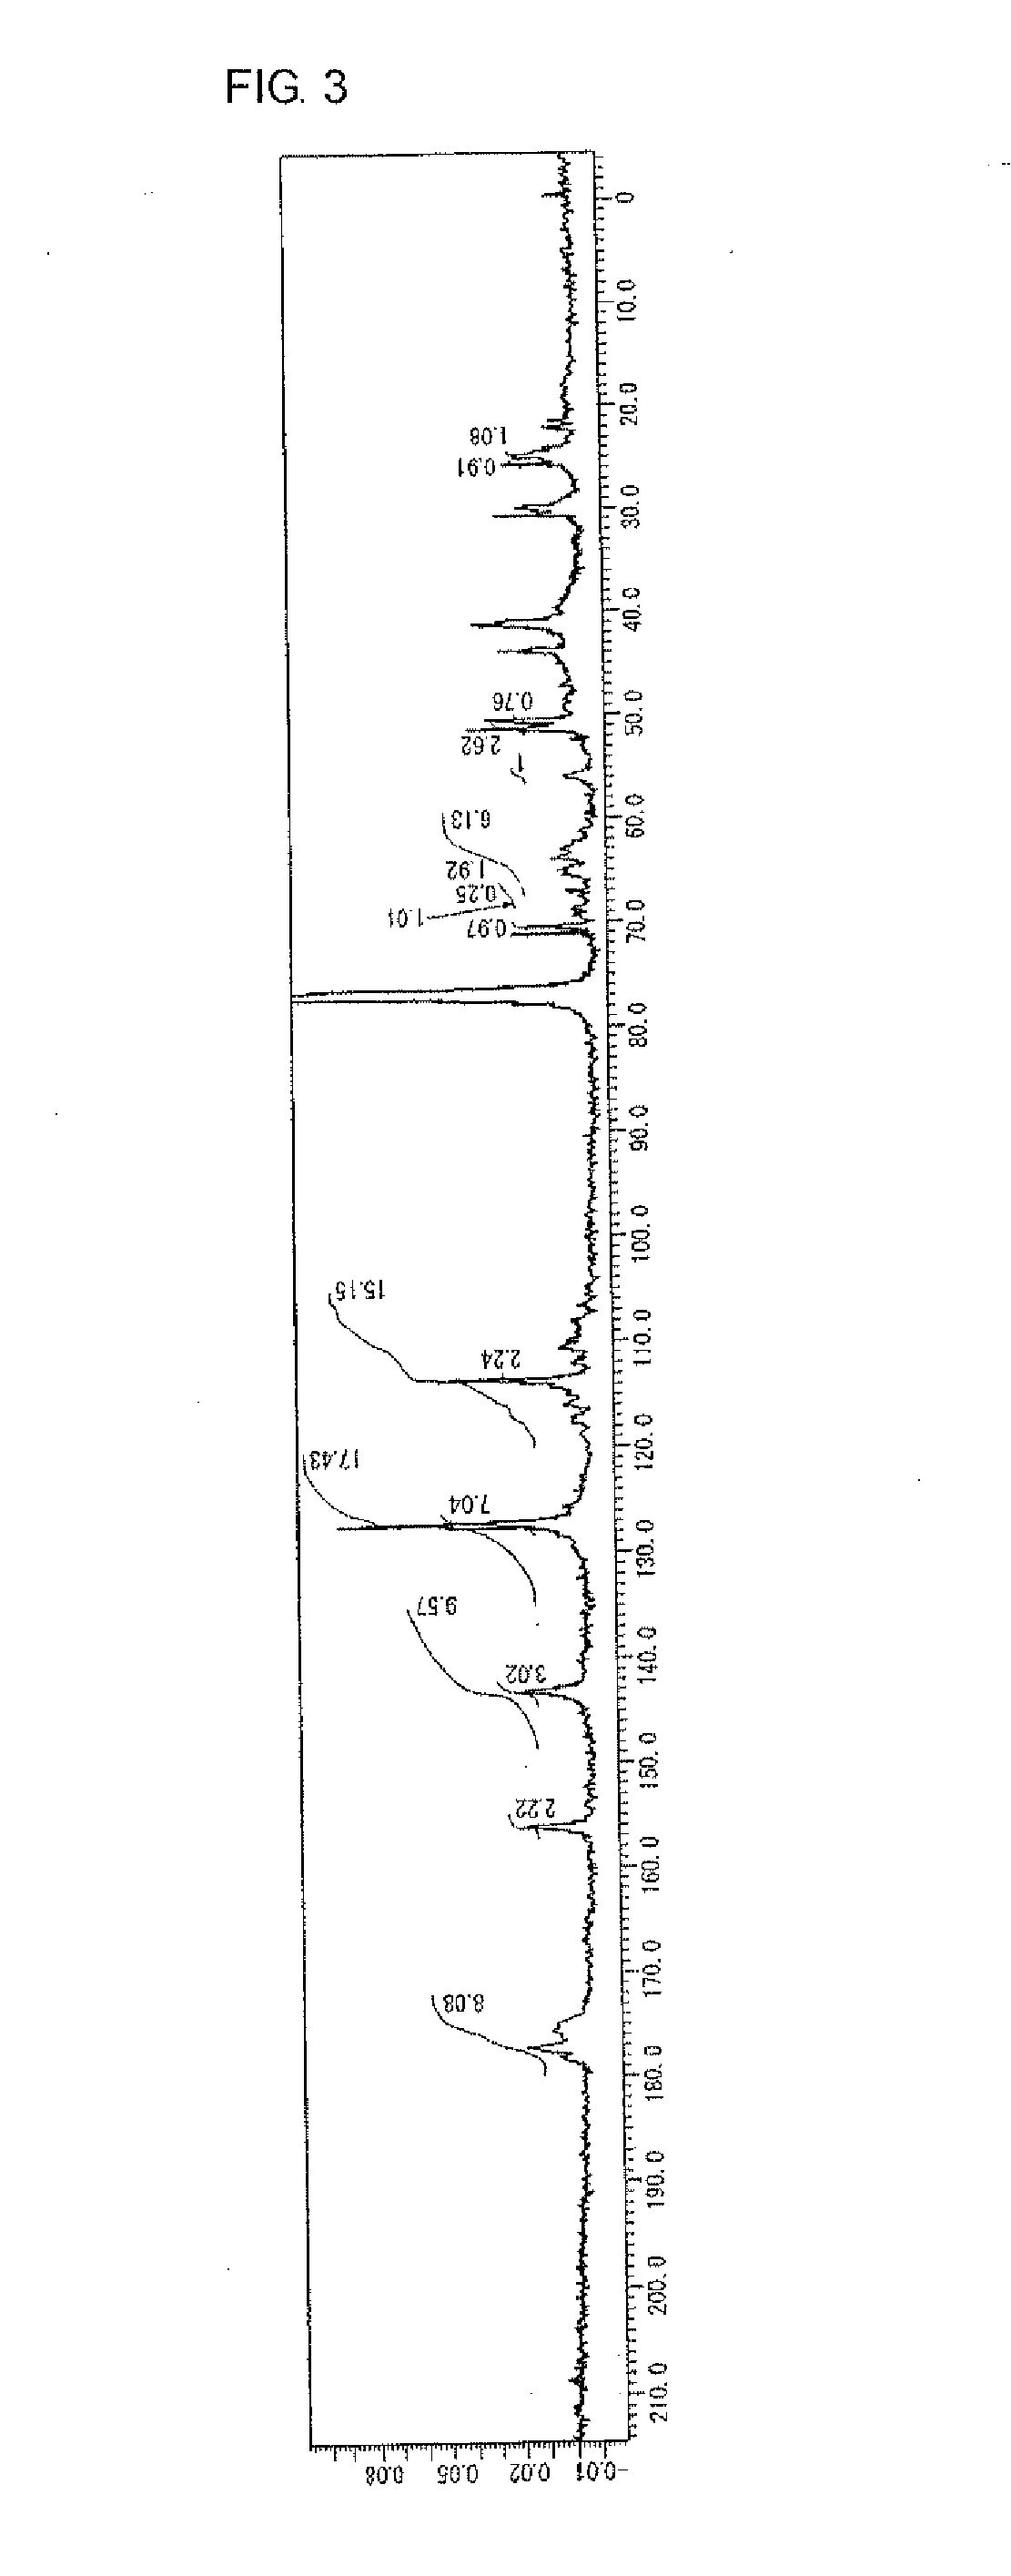 Fluorine-containing highly branched polymer and epoxy resin composition containing the same